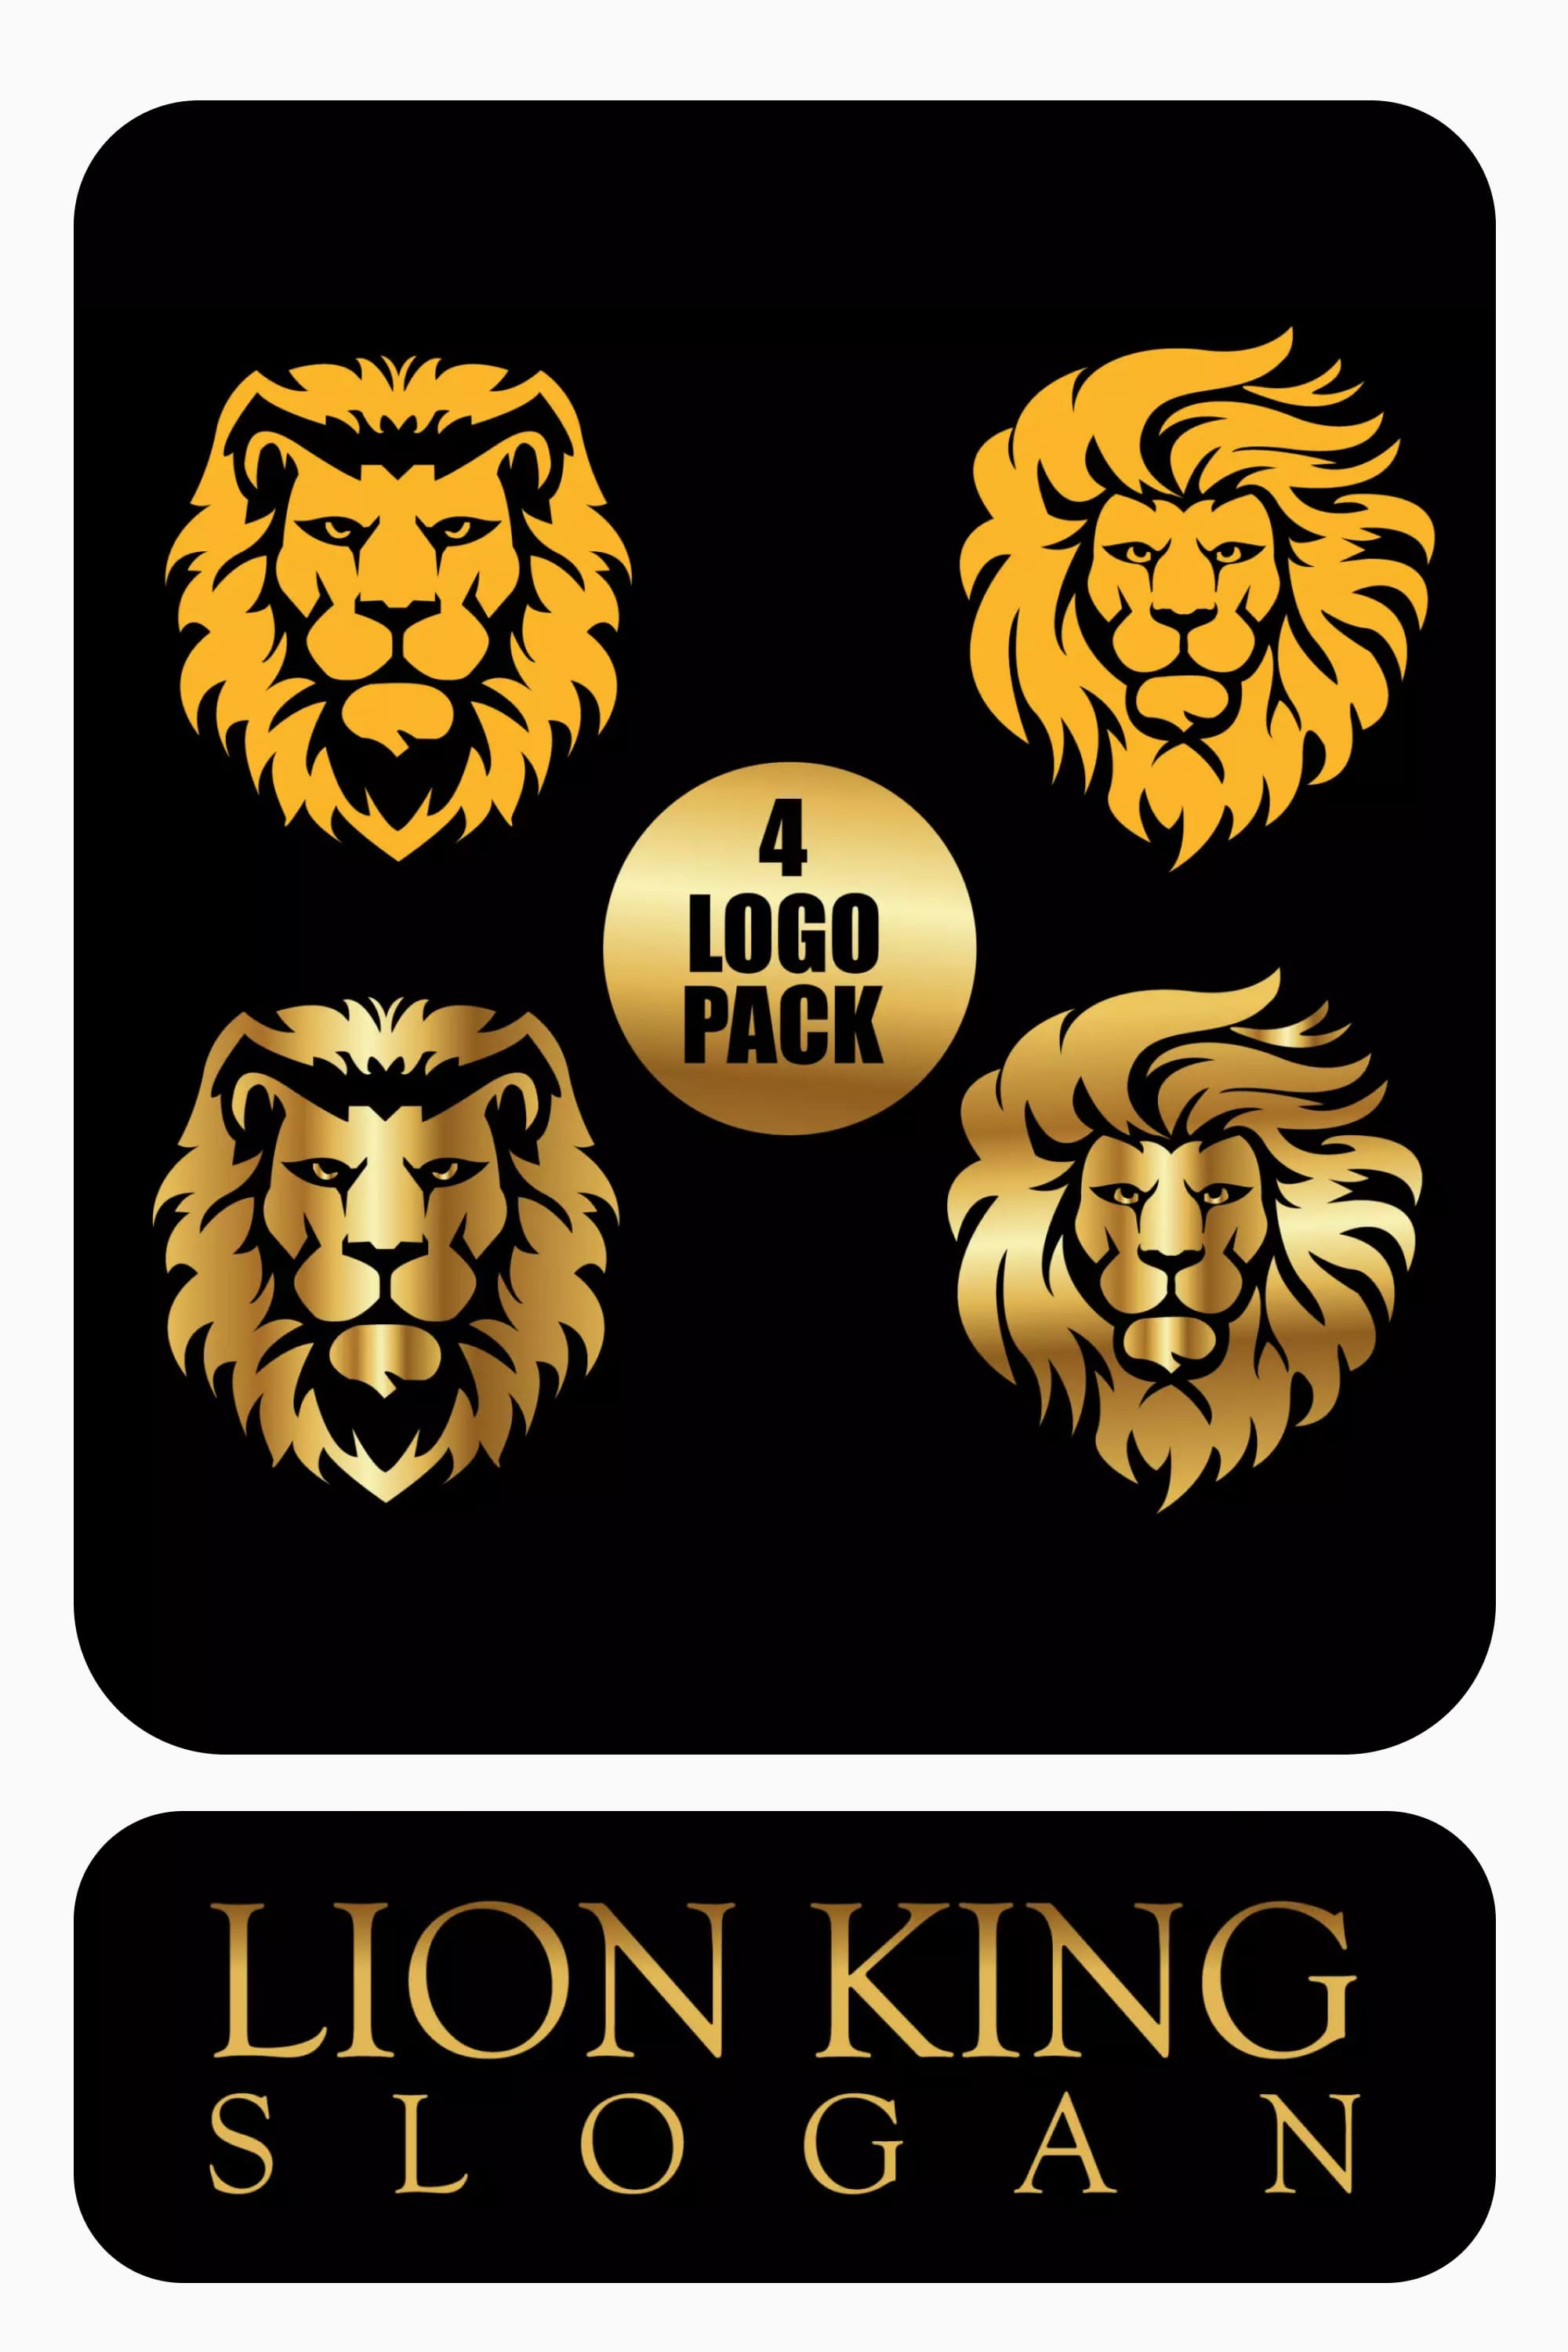 Collage of logos in the form of a lion's head with a lush mane.